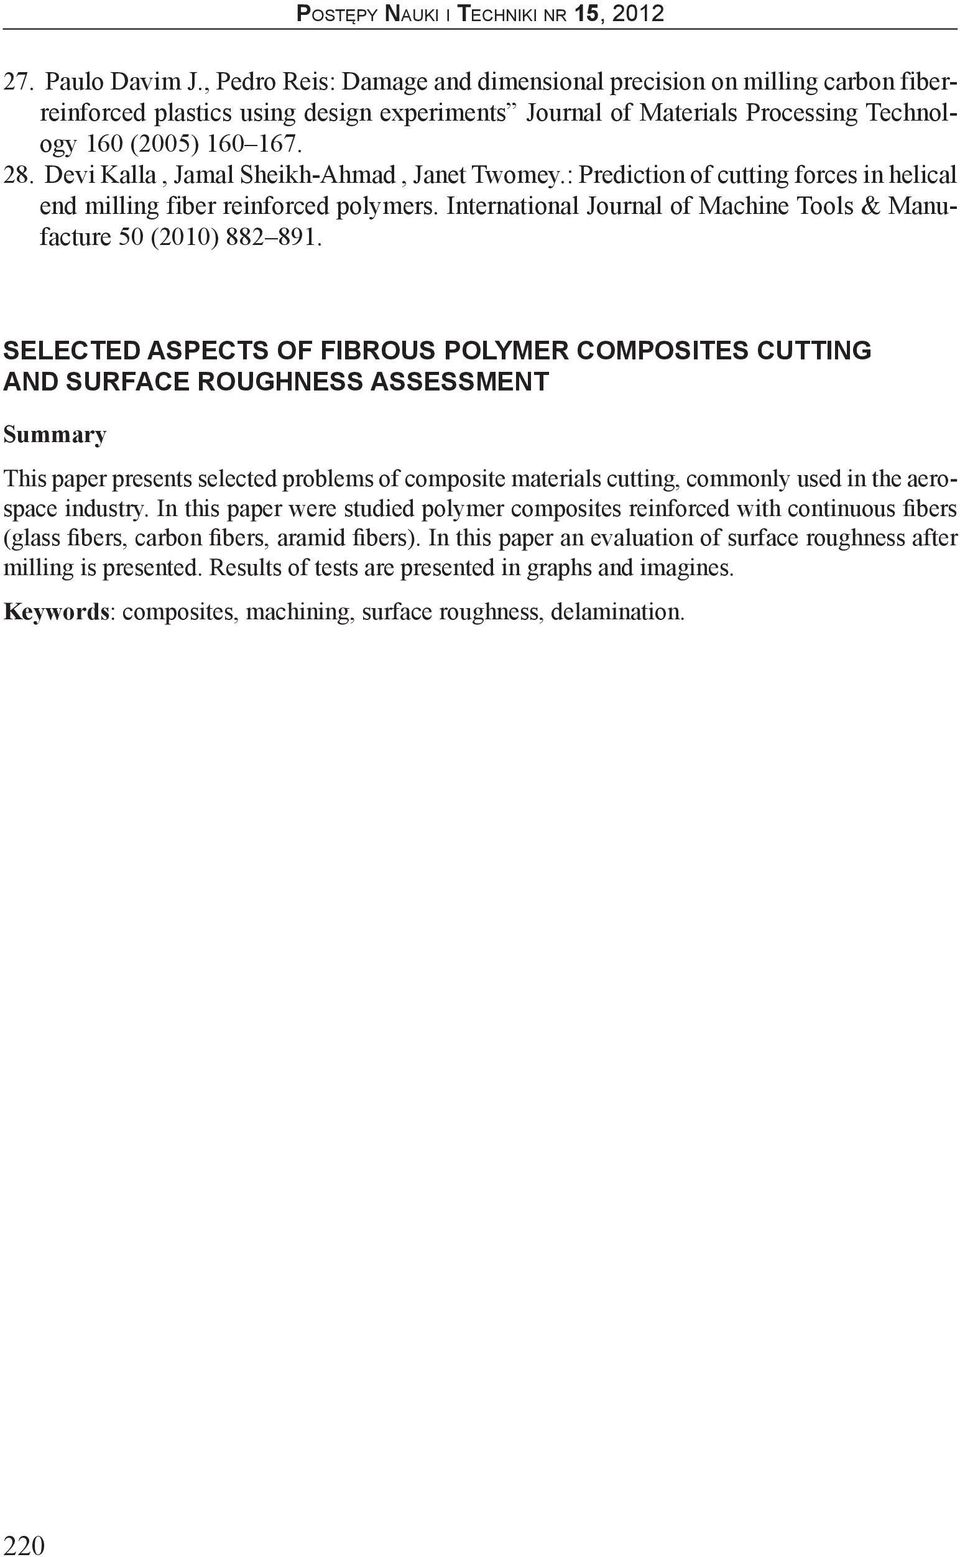 SELECTED ASPECTS OF FIBROUS POLYMER COMPOSITES CUTTING AND SURFACE ROUGHNESS ASSESSMENT Summary This paper presents selected problems of composite materials cutting, commonly used in the aerospace